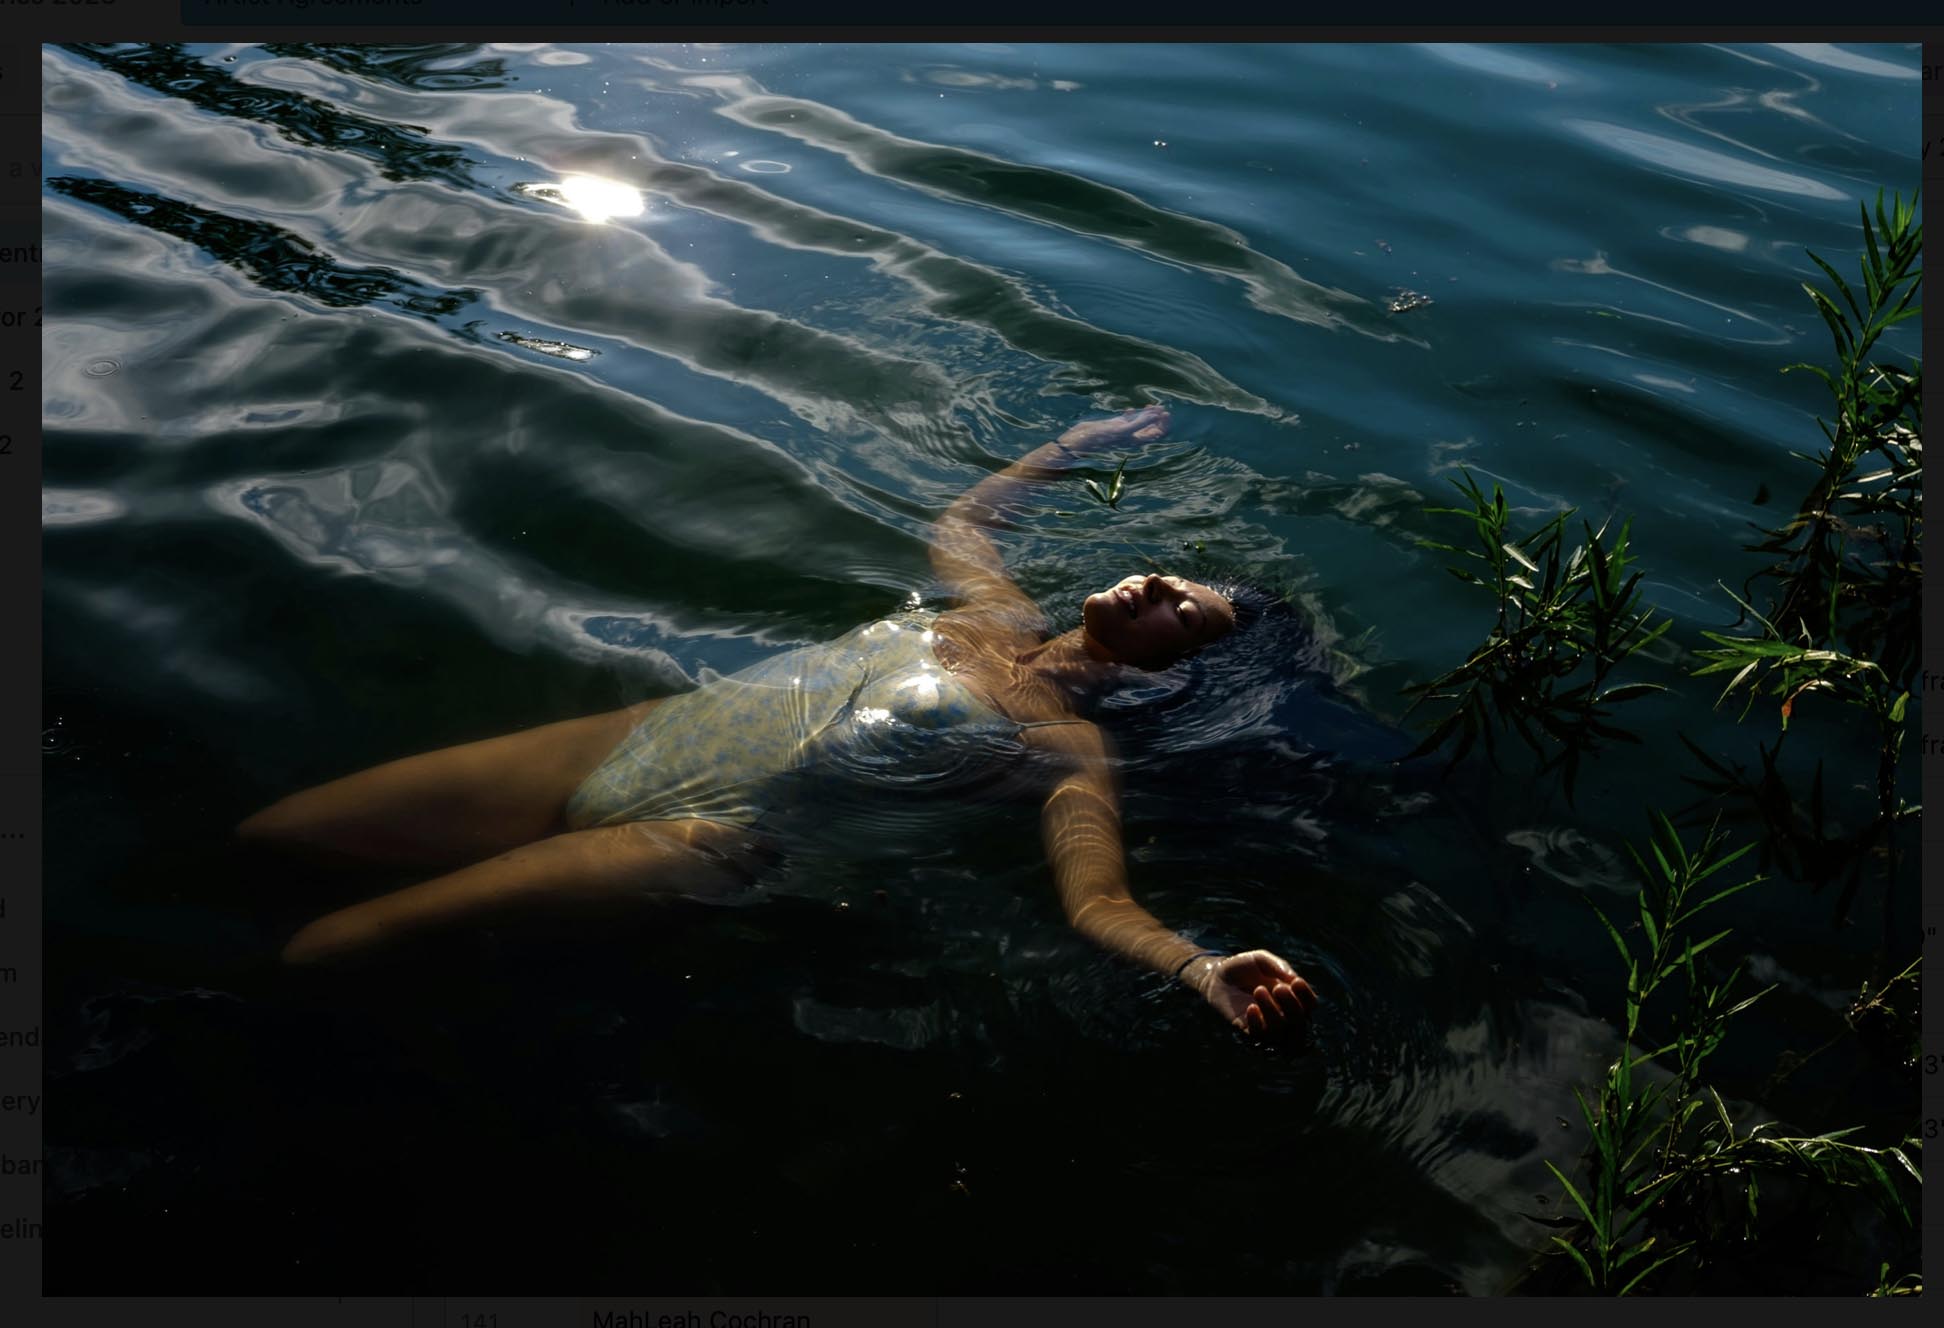 A light-skinned person in a white body suit, floating in a body of water with the sun reflecting in the water. Pine branches crowd the right side of the piece.